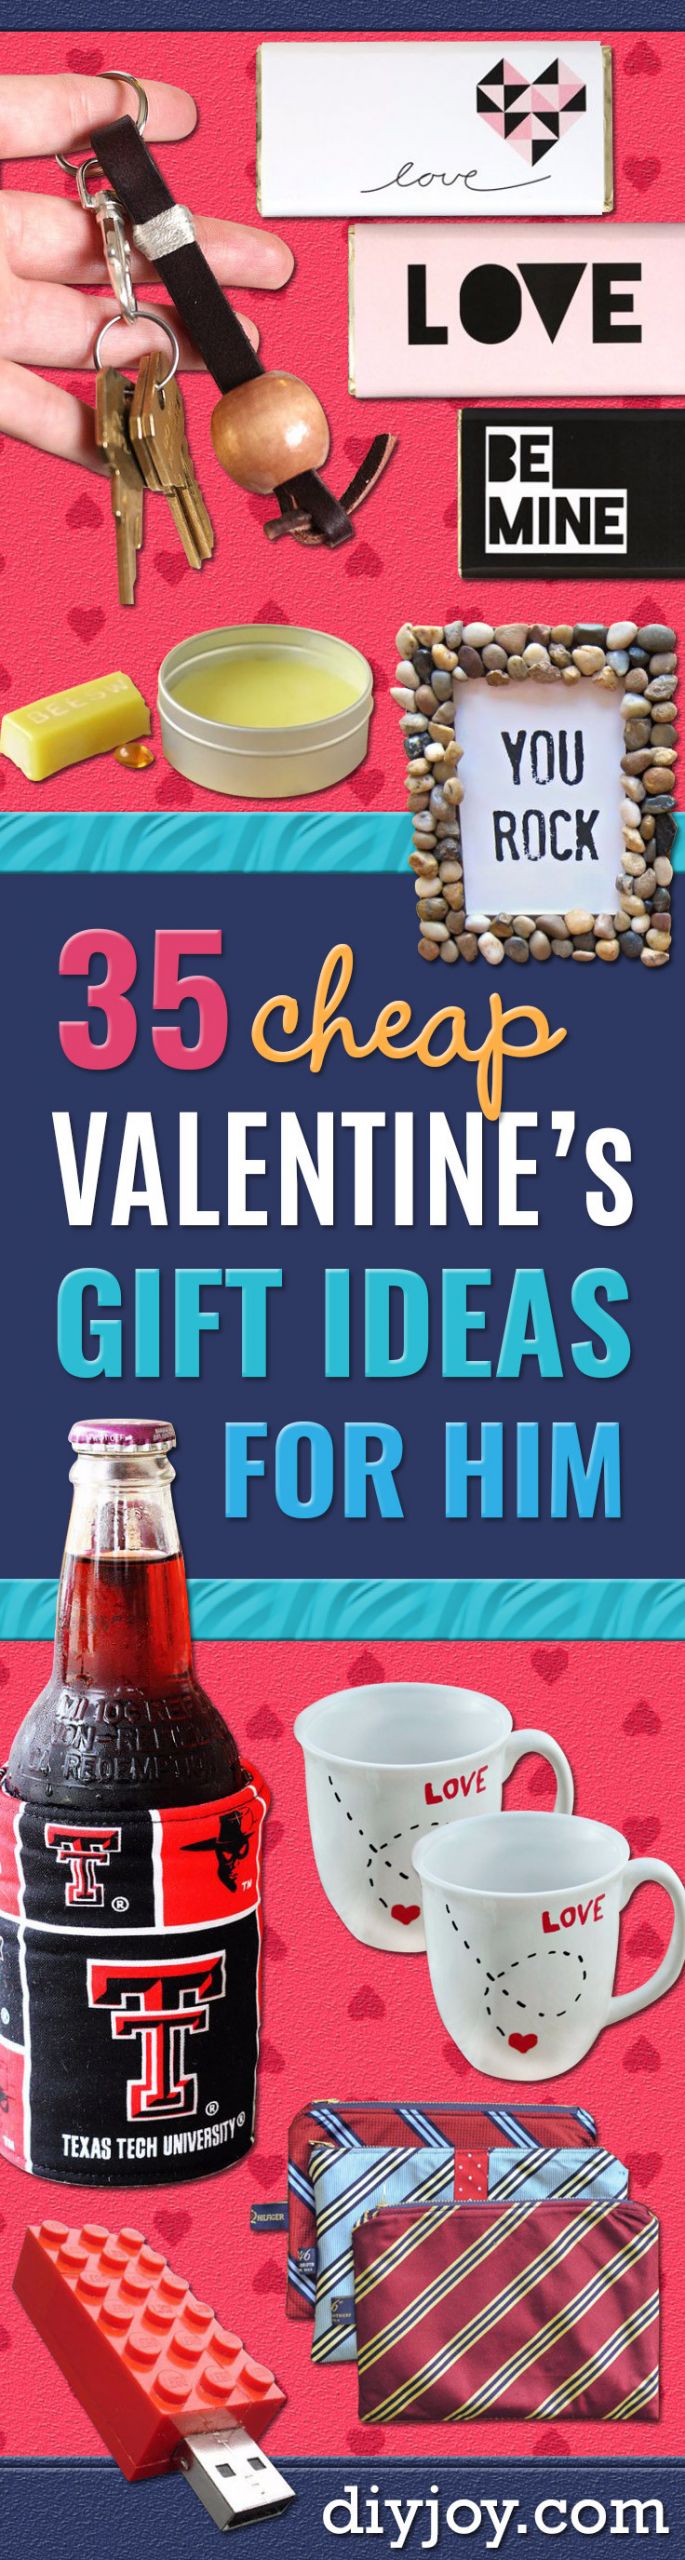 Gift Ideas For Him For Valentines
 35 Cheap Valentine s Gift Ideas for Him